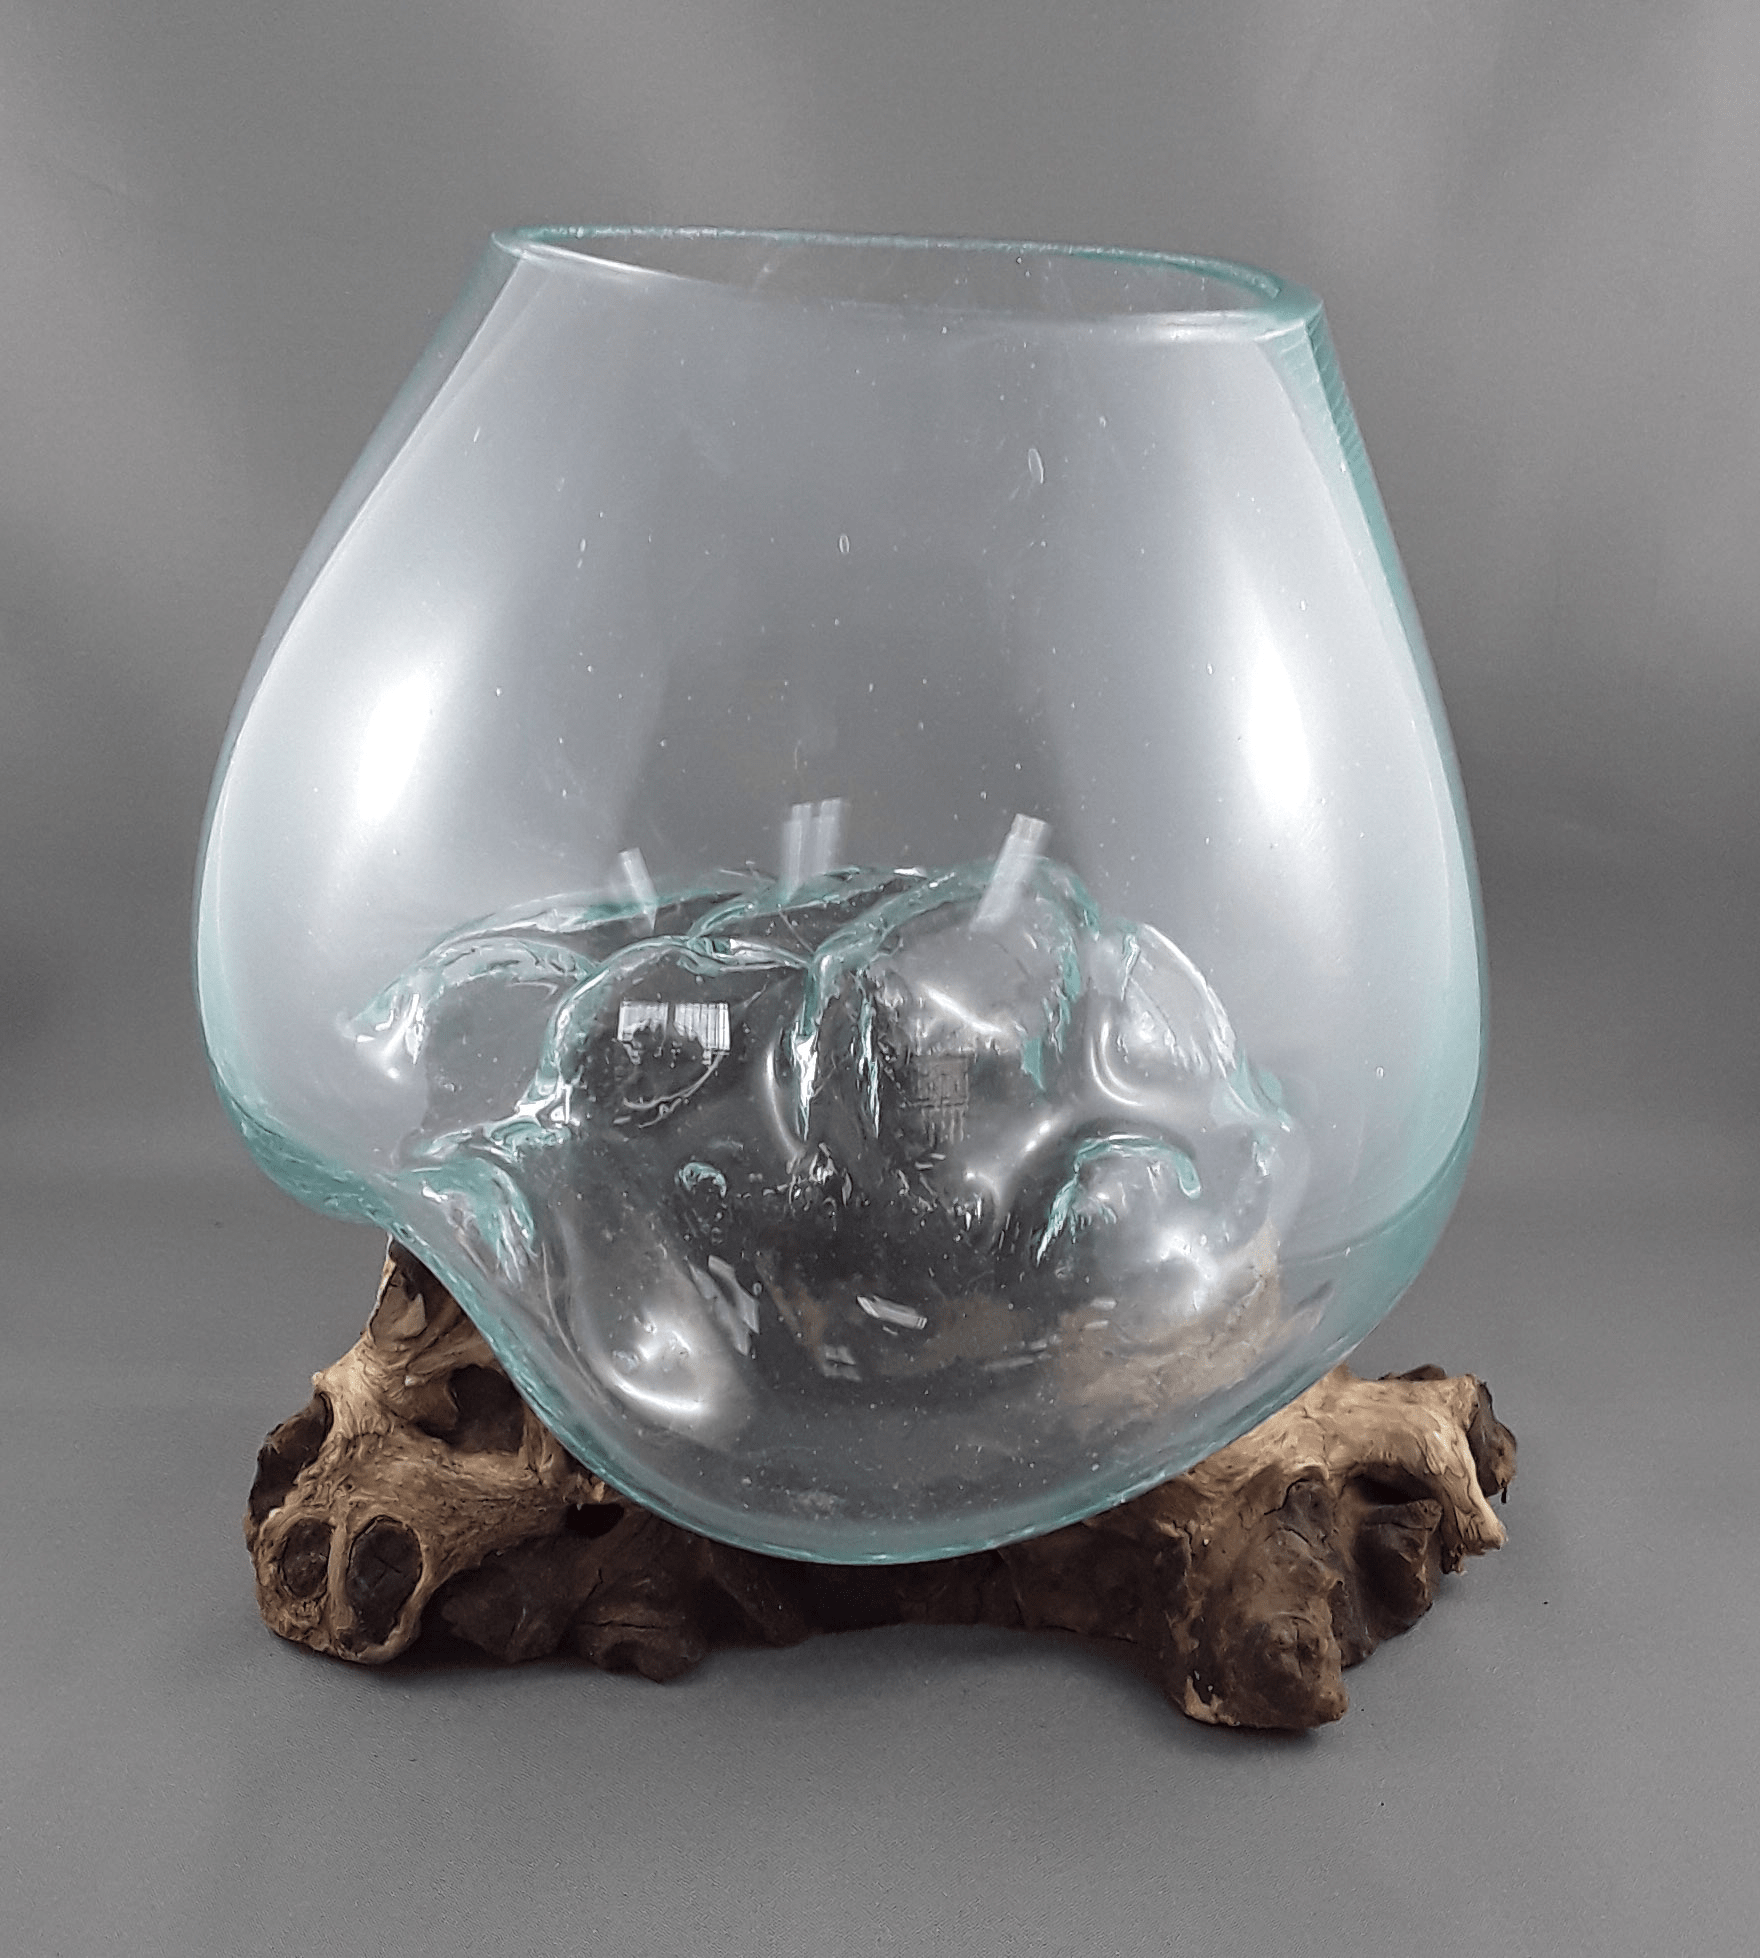 Gamal root base with glass vase - Birdie’s Nest Inc 